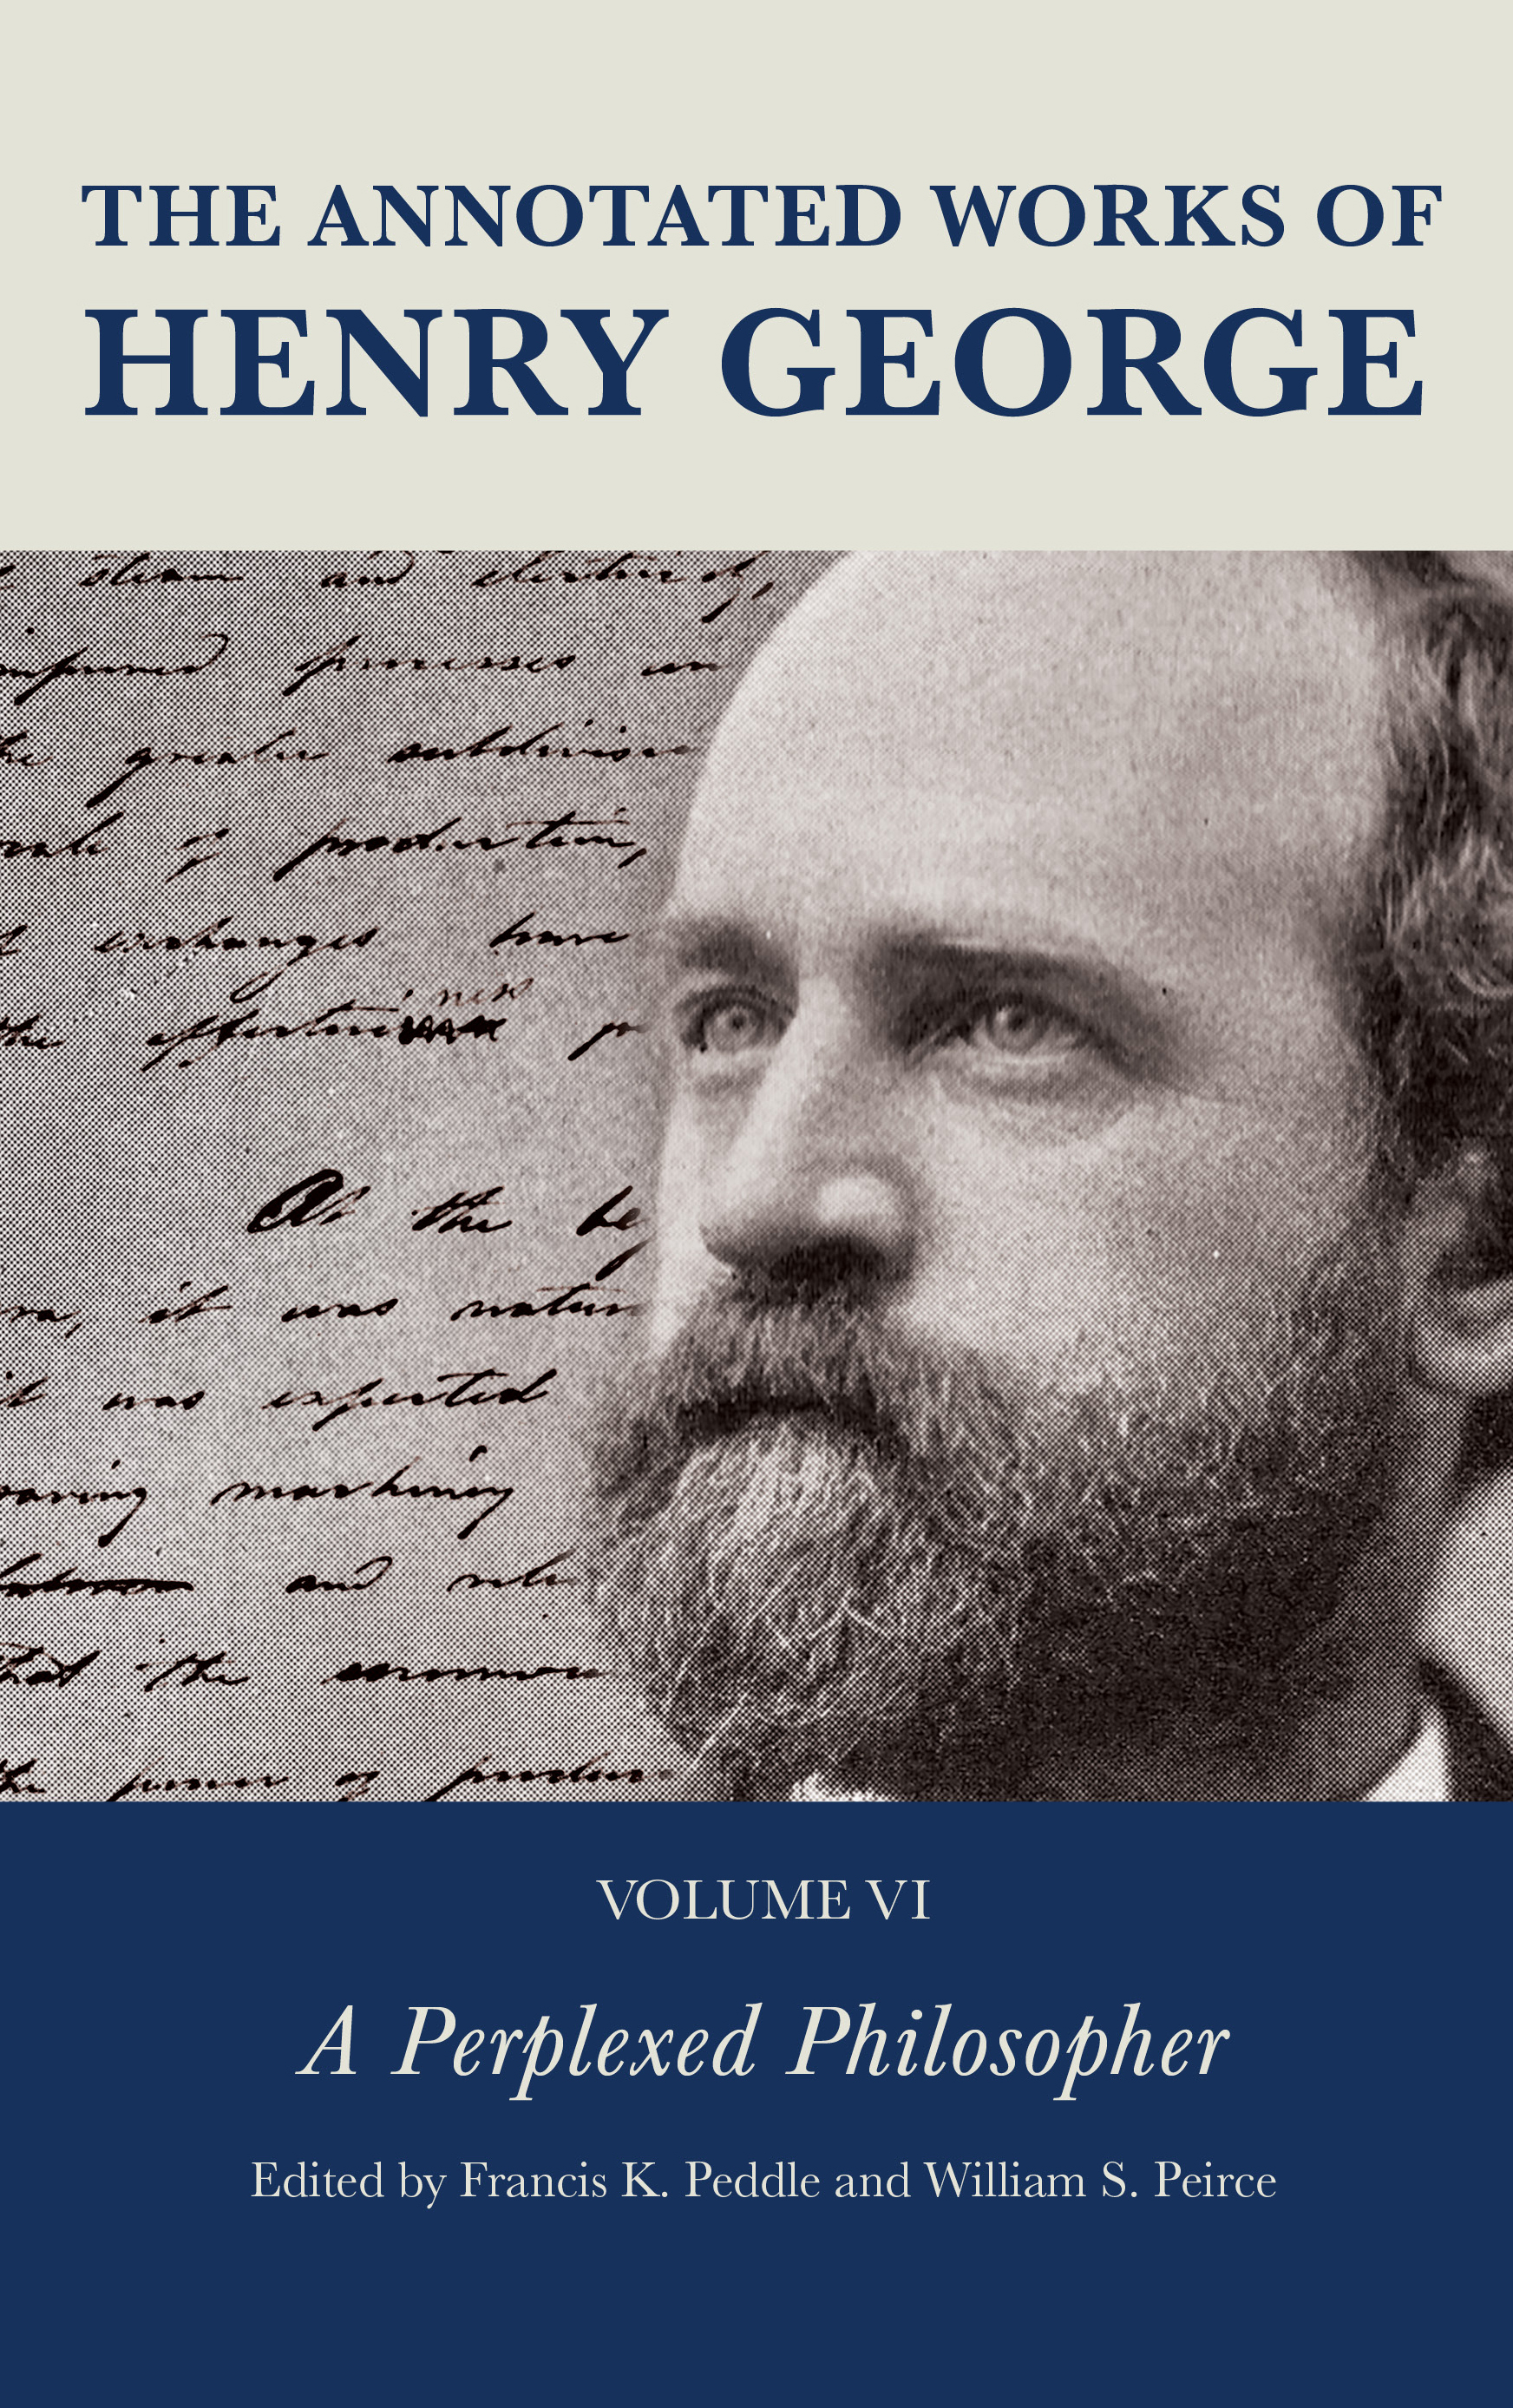 The Annotated Works of Henry George: A Perplexed Philosopher